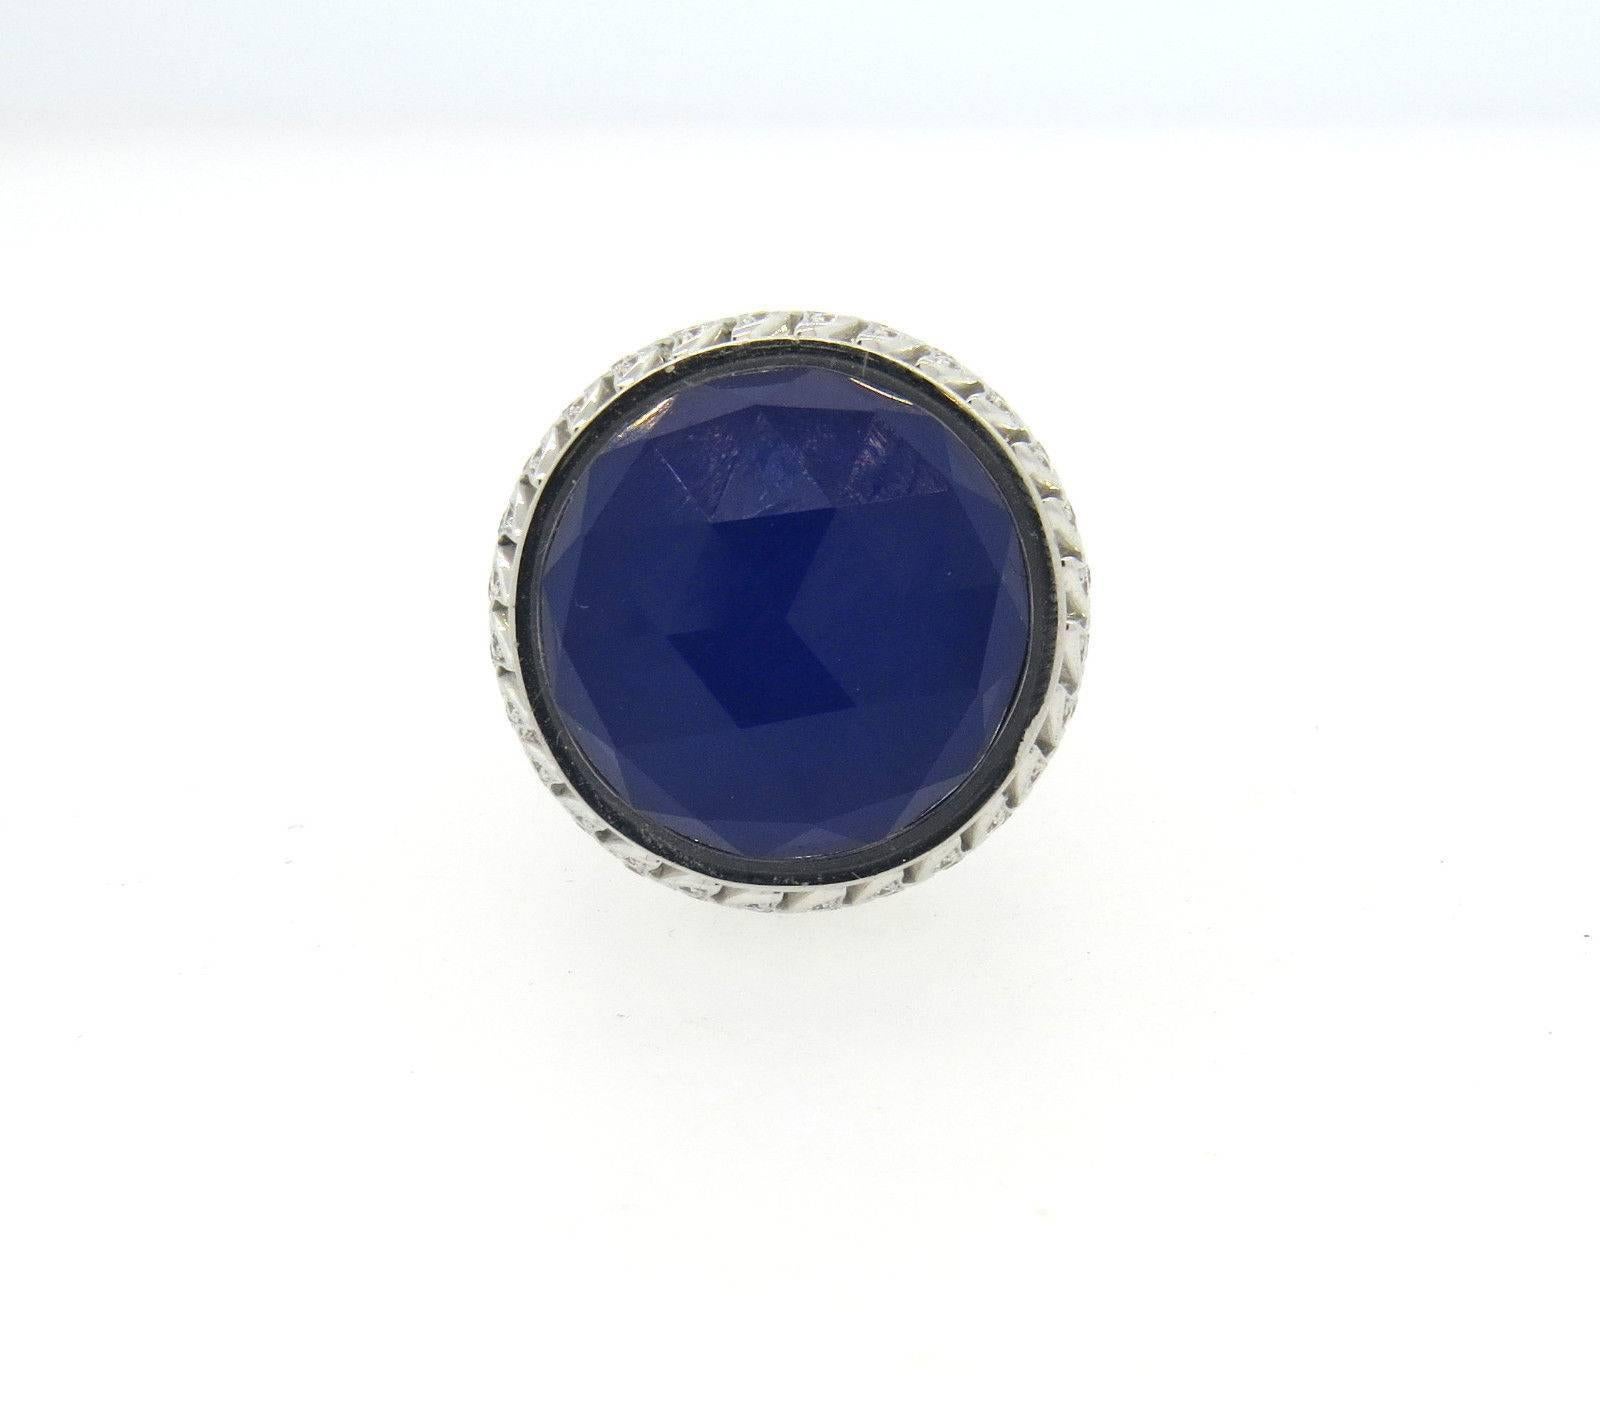 Large new 18k white gold ring, cradted by Stephen Webster, featuring faceted quartz over lapis, surrounded with a1.44ctw in GH/VS diamonds on movable bezel. Ring size 7 1/4, ring top is 26mm in diameter . Marked: SW, English marks, Webster hallmark